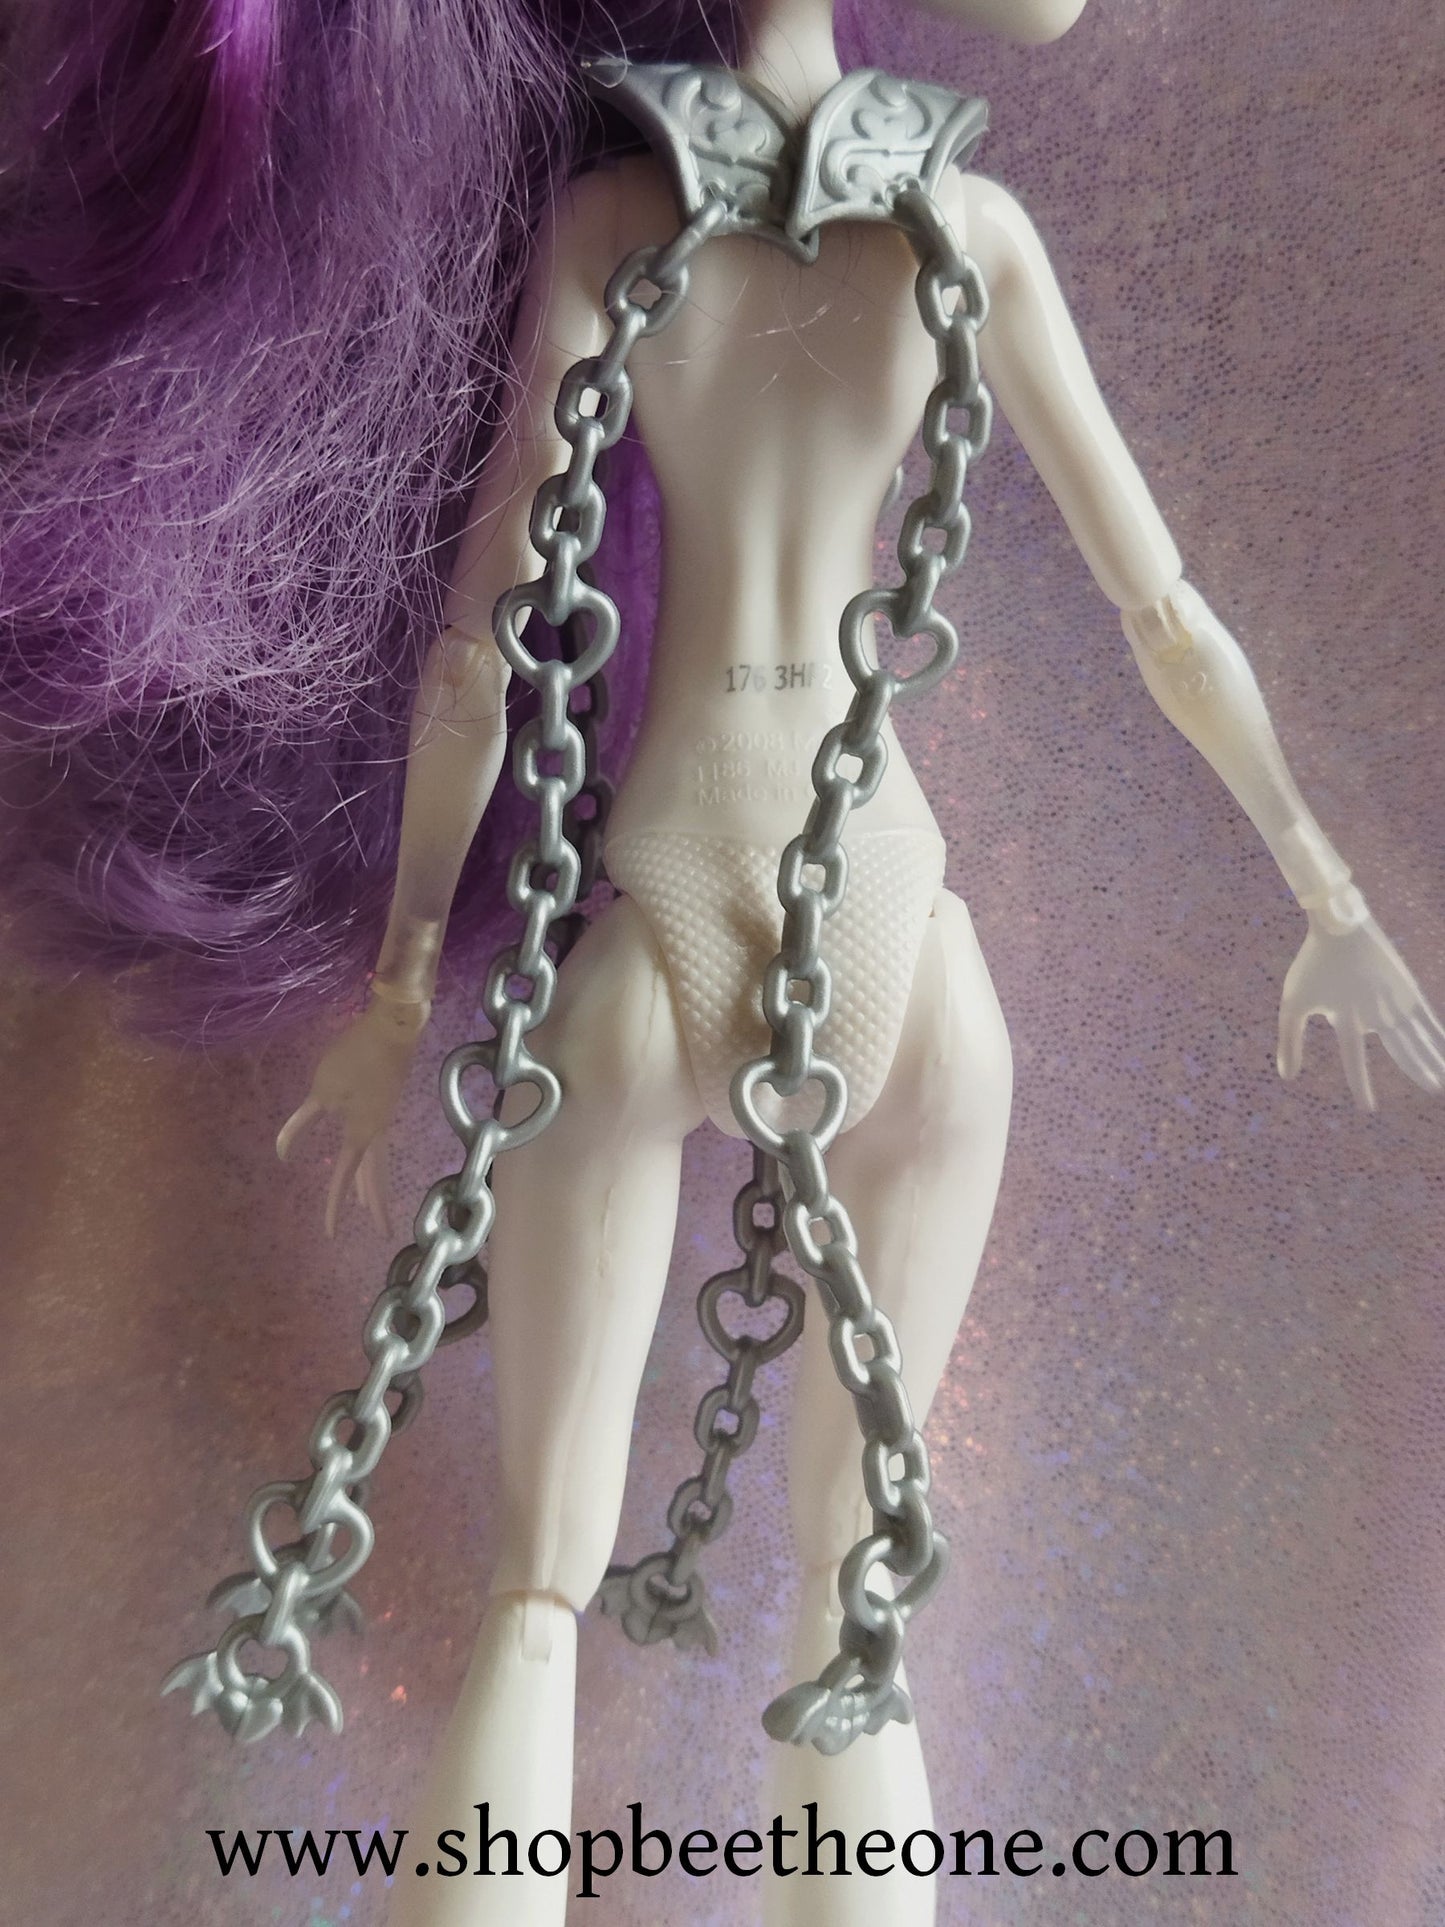 Draculaura Haunted Getting Ghostly - Mattel 2014 - Accessoire